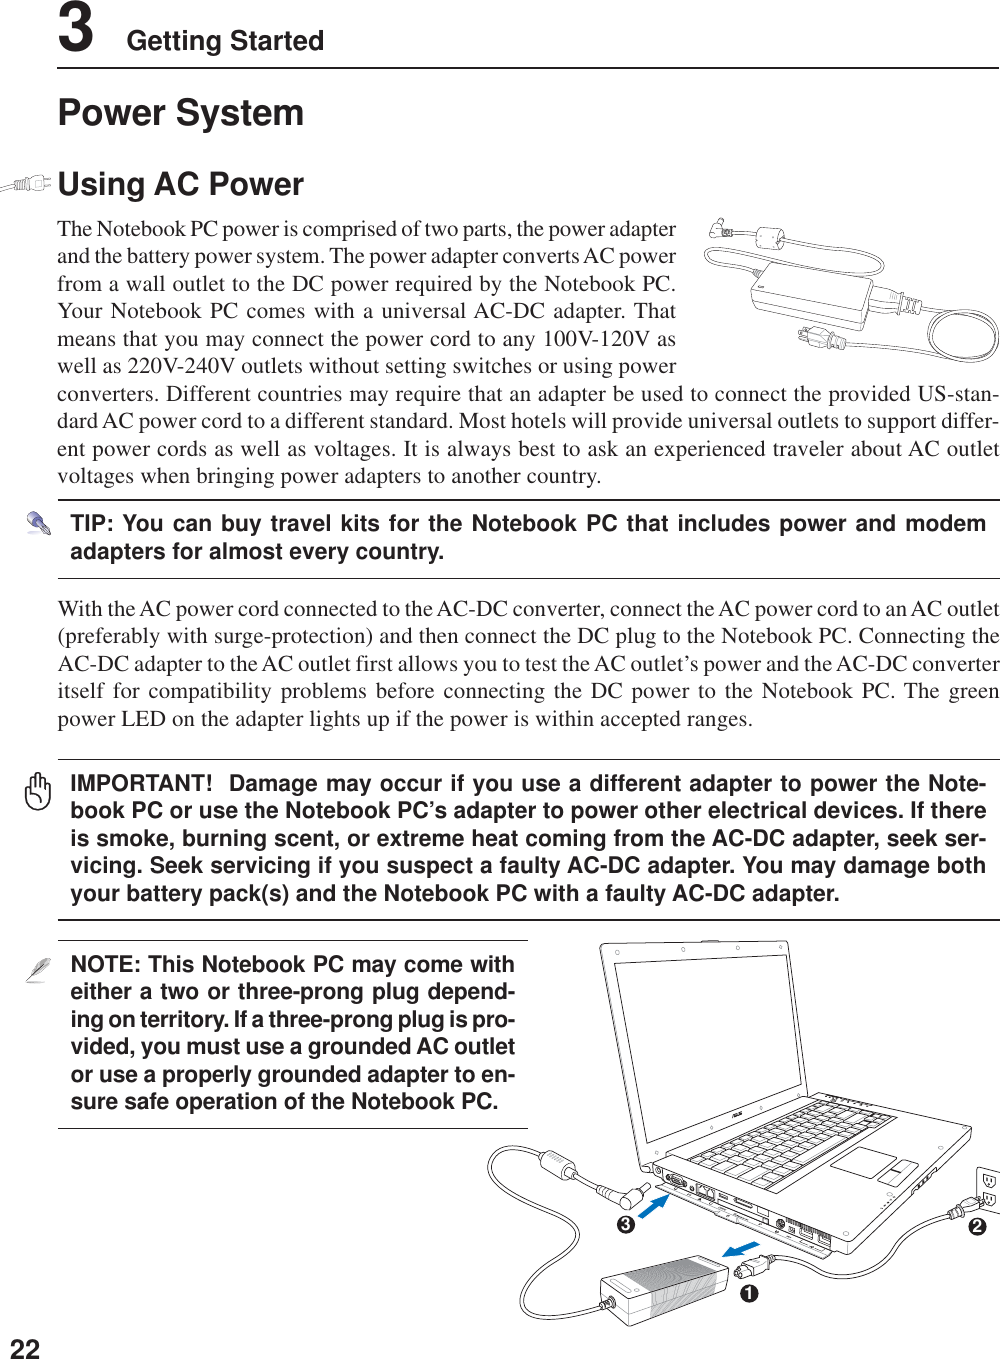 223    Getting StartedDV321NOTE: This Notebook PC may come witheither a two or three-prong plug depend-ing on territory. If a three-prong plug is pro-vided, you must use a grounded AC outletor use a properly grounded adapter to en-sure safe operation of the Notebook PC.With the AC power cord connected to the AC-DC converter, connect the AC power cord to an AC outlet(preferably with surge-protection) and then connect the DC plug to the Notebook PC. Connecting theAC-DC adapter to the AC outlet first allows you to test the AC outlet’s power and the AC-DC converteritself for compatibility problems before connecting the DC power to the Notebook PC. The greenpower LED on the adapter lights up if the power is within accepted ranges.TIP: You can buy travel kits for the Notebook PC that includes power and modemadapters for almost every country.IMPORTANT!  Damage may occur if you use a different adapter to power the Note-book PC or use the Notebook PC’s adapter to power other electrical devices. If thereis smoke, burning scent, or extreme heat coming from the AC-DC adapter, seek ser-vicing. Seek servicing if you suspect a faulty AC-DC adapter. You may damage bothyour battery pack(s) and the Notebook PC with a faulty AC-DC adapter.Power SystemUsing AC PowerThe Notebook PC power is comprised of two parts, the power adapterand the battery power system. The power adapter converts AC powerfrom a wall outlet to the DC power required by the Notebook PC.Your Notebook PC comes with a universal AC-DC adapter. Thatmeans that you may connect the power cord to any 100V-120V aswell as 220V-240V outlets without setting switches or using powerconverters. Different countries may require that an adapter be used to connect the provided US-stan-dard AC power cord to a different standard. Most hotels will provide universal outlets to support differ-ent power cords as well as voltages. It is always best to ask an experienced traveler about AC outletvoltages when bringing power adapters to another country.